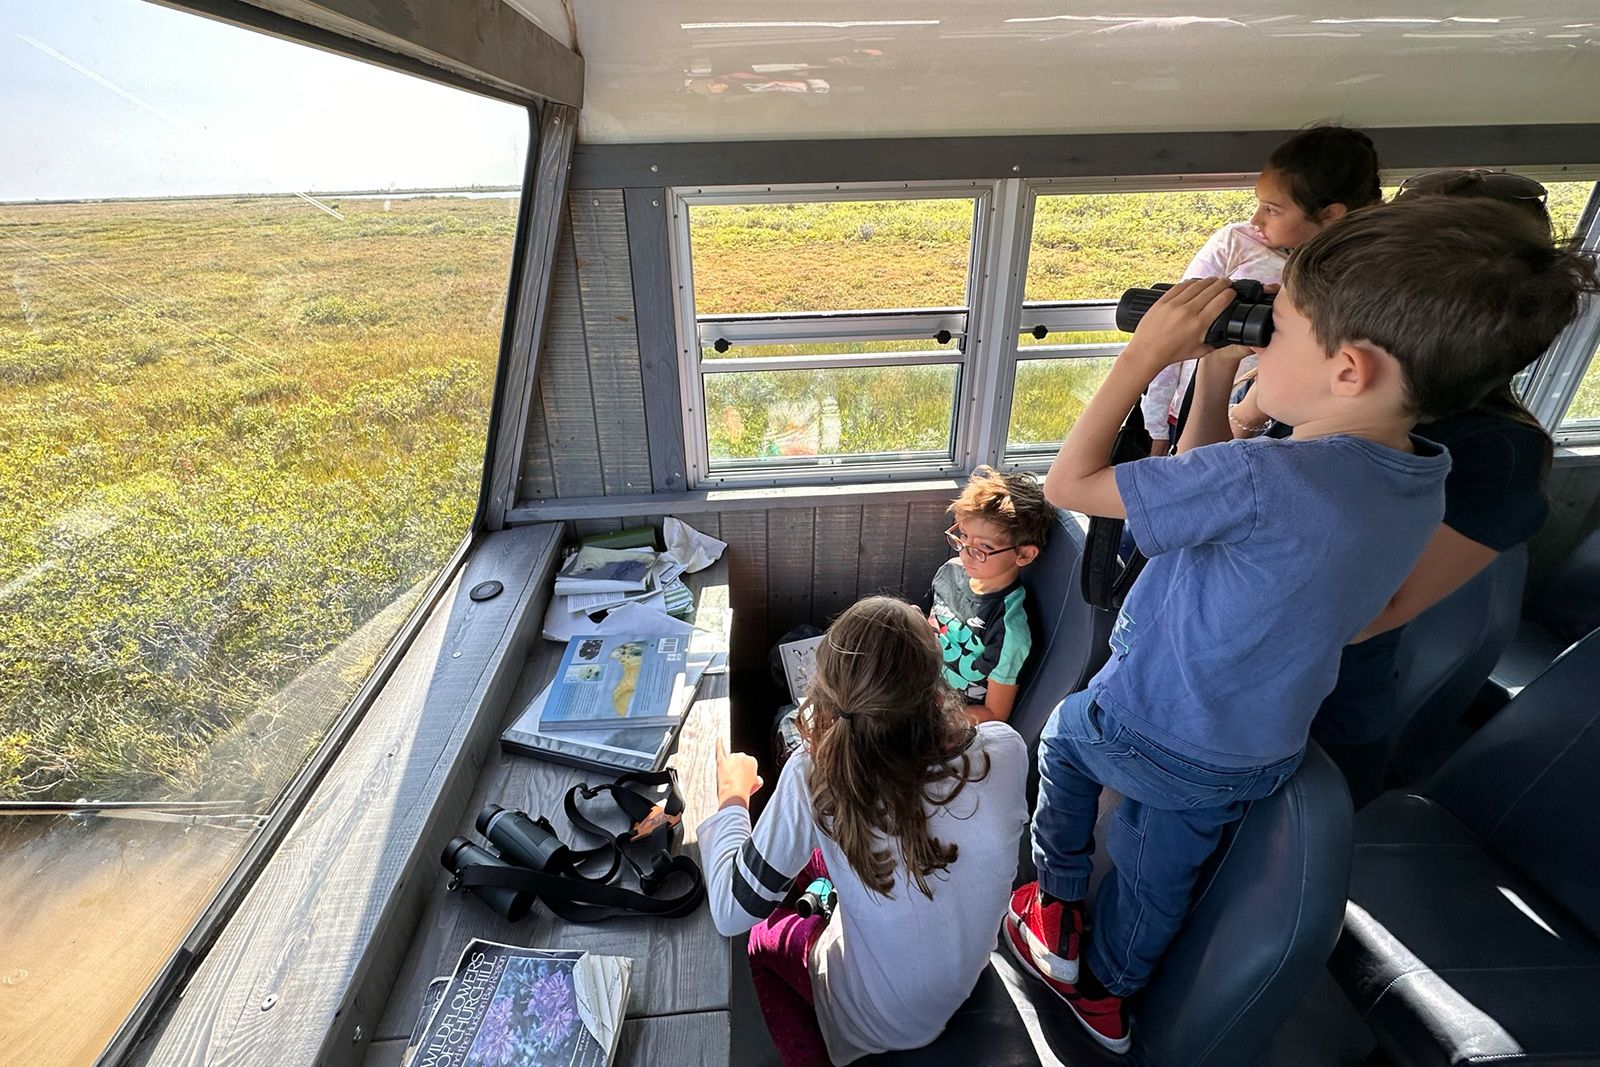 Bring your binoculars! Young Tundra Buggy passengers with Frontier North Adventures scout for wildlife during a stop in the Churchill Wildlife Management Area.